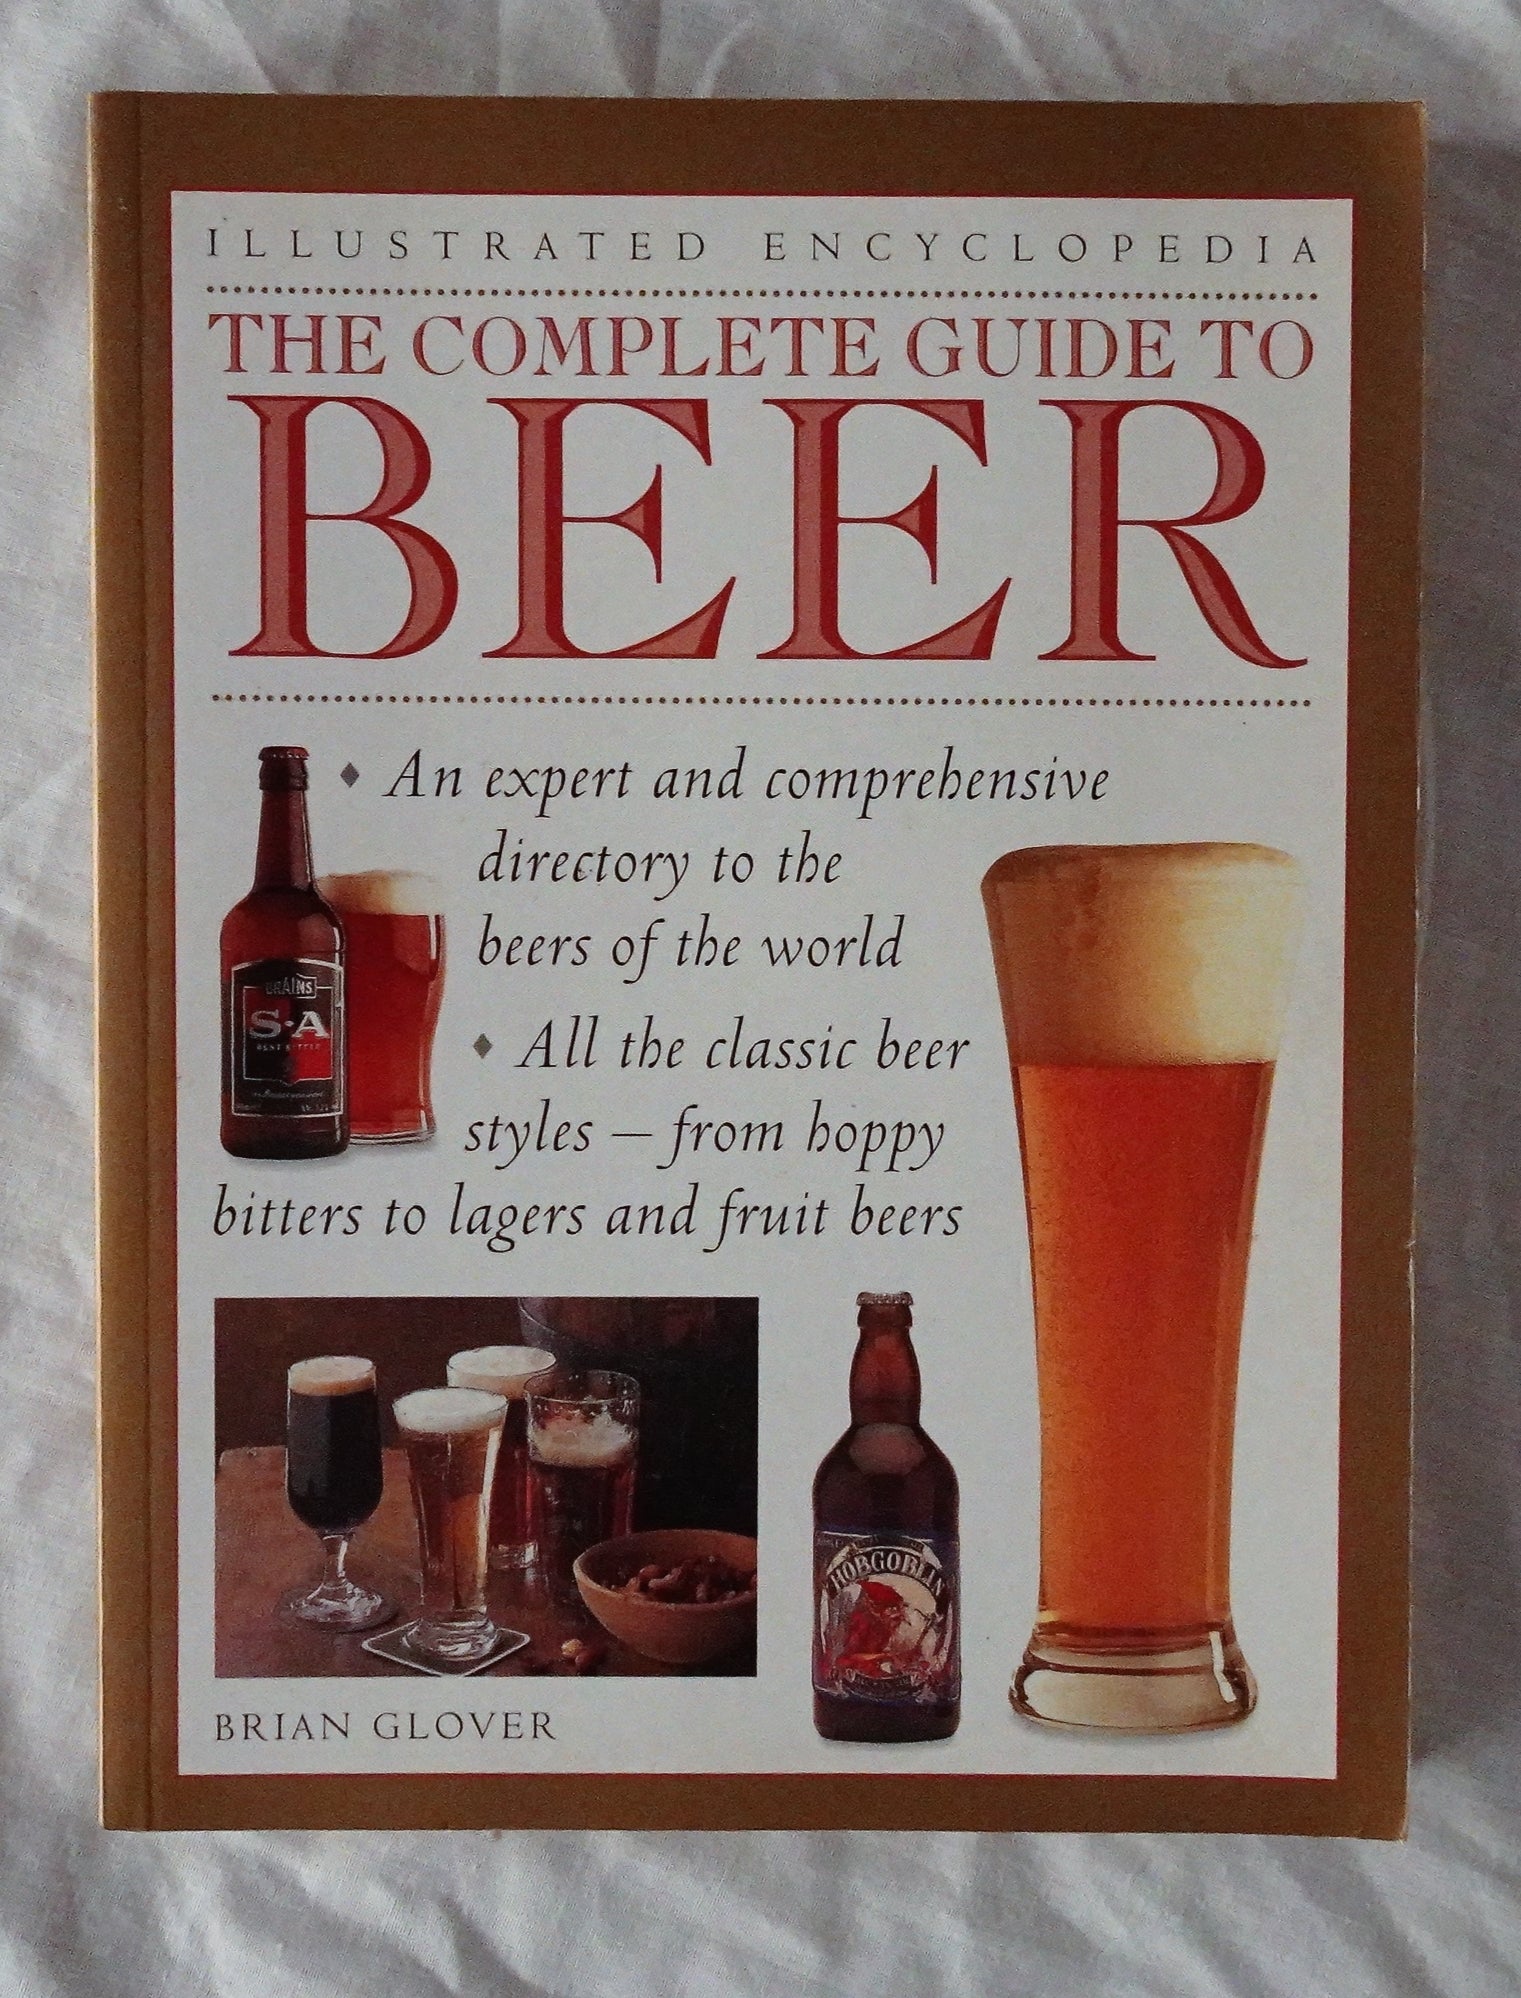 The Complete Guide to Beer  (Illustrated Encyclopedia)  An expert and comprehensive directory to the beers of the world  by Brian Glover